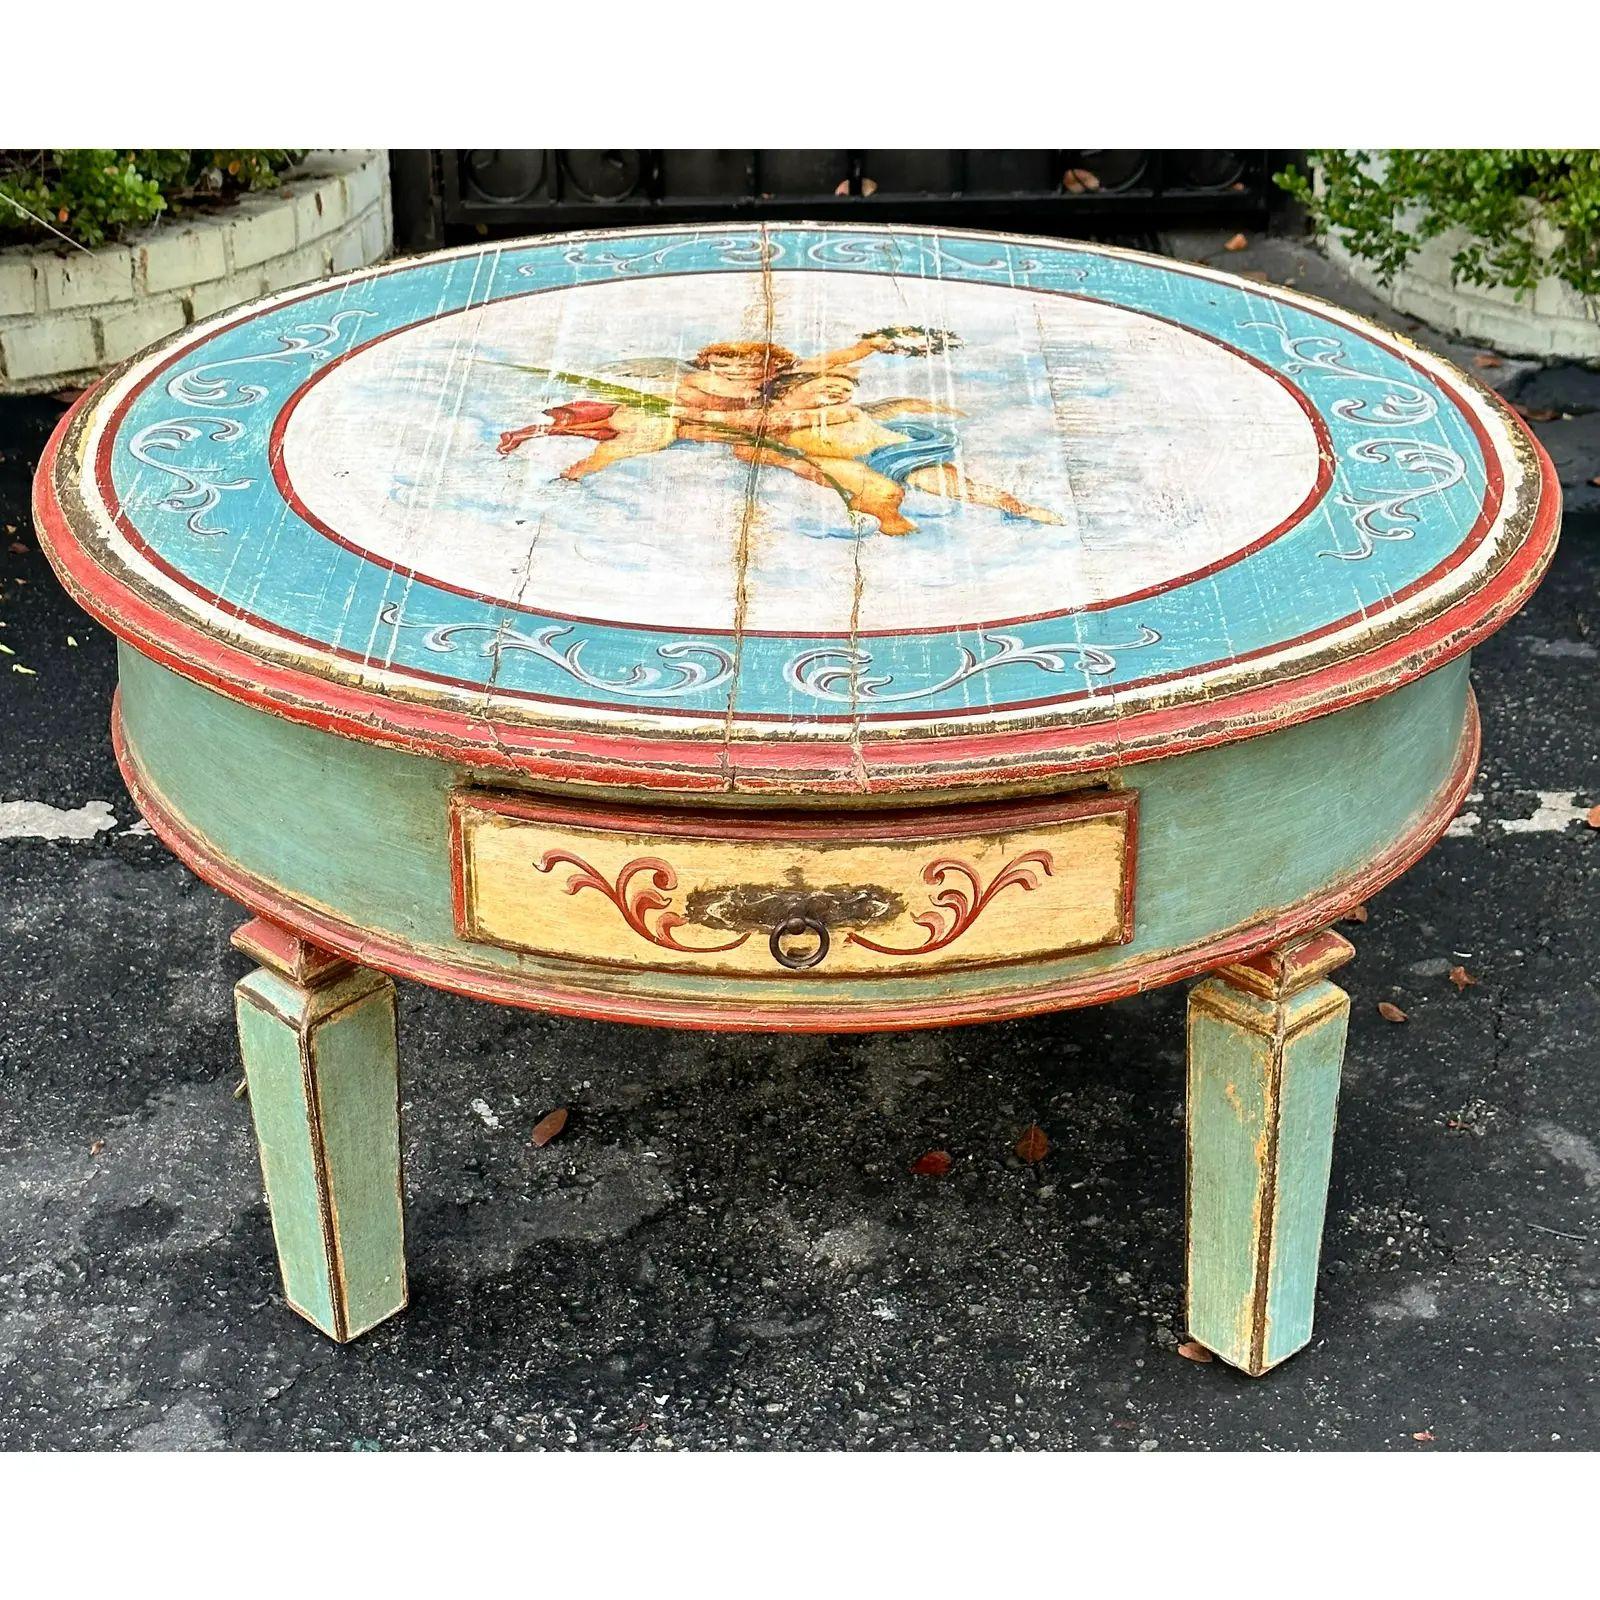 Hand-Painted 18th C Style Round Hand Painted Angel Coffee Table by Equator Furniture